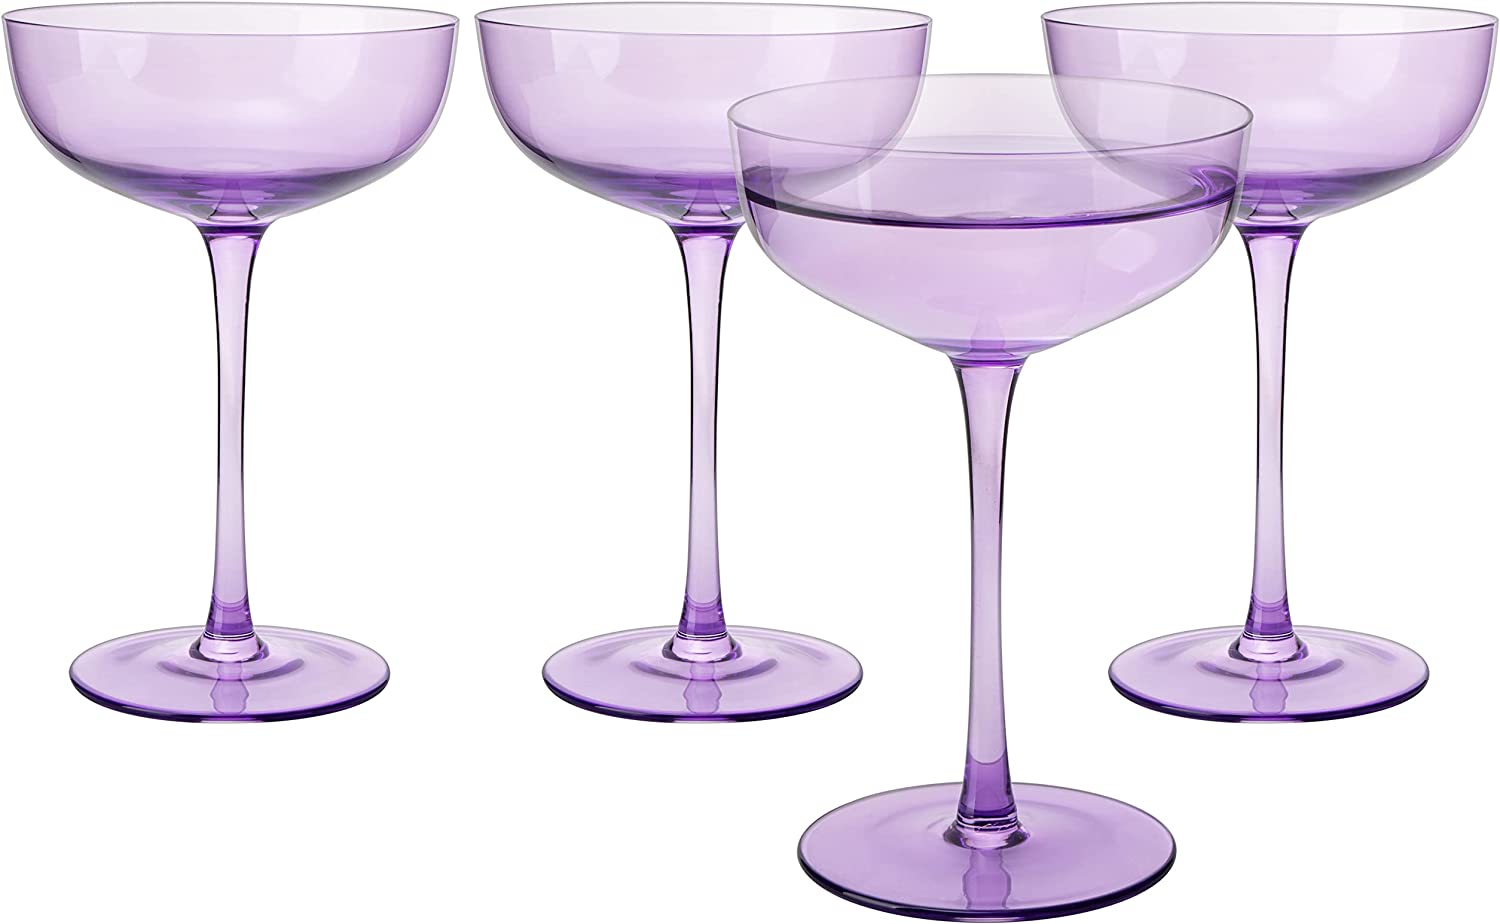 Lavender Champagne Coupes 12oz Set of 6 by The Wine Savant - Colored C